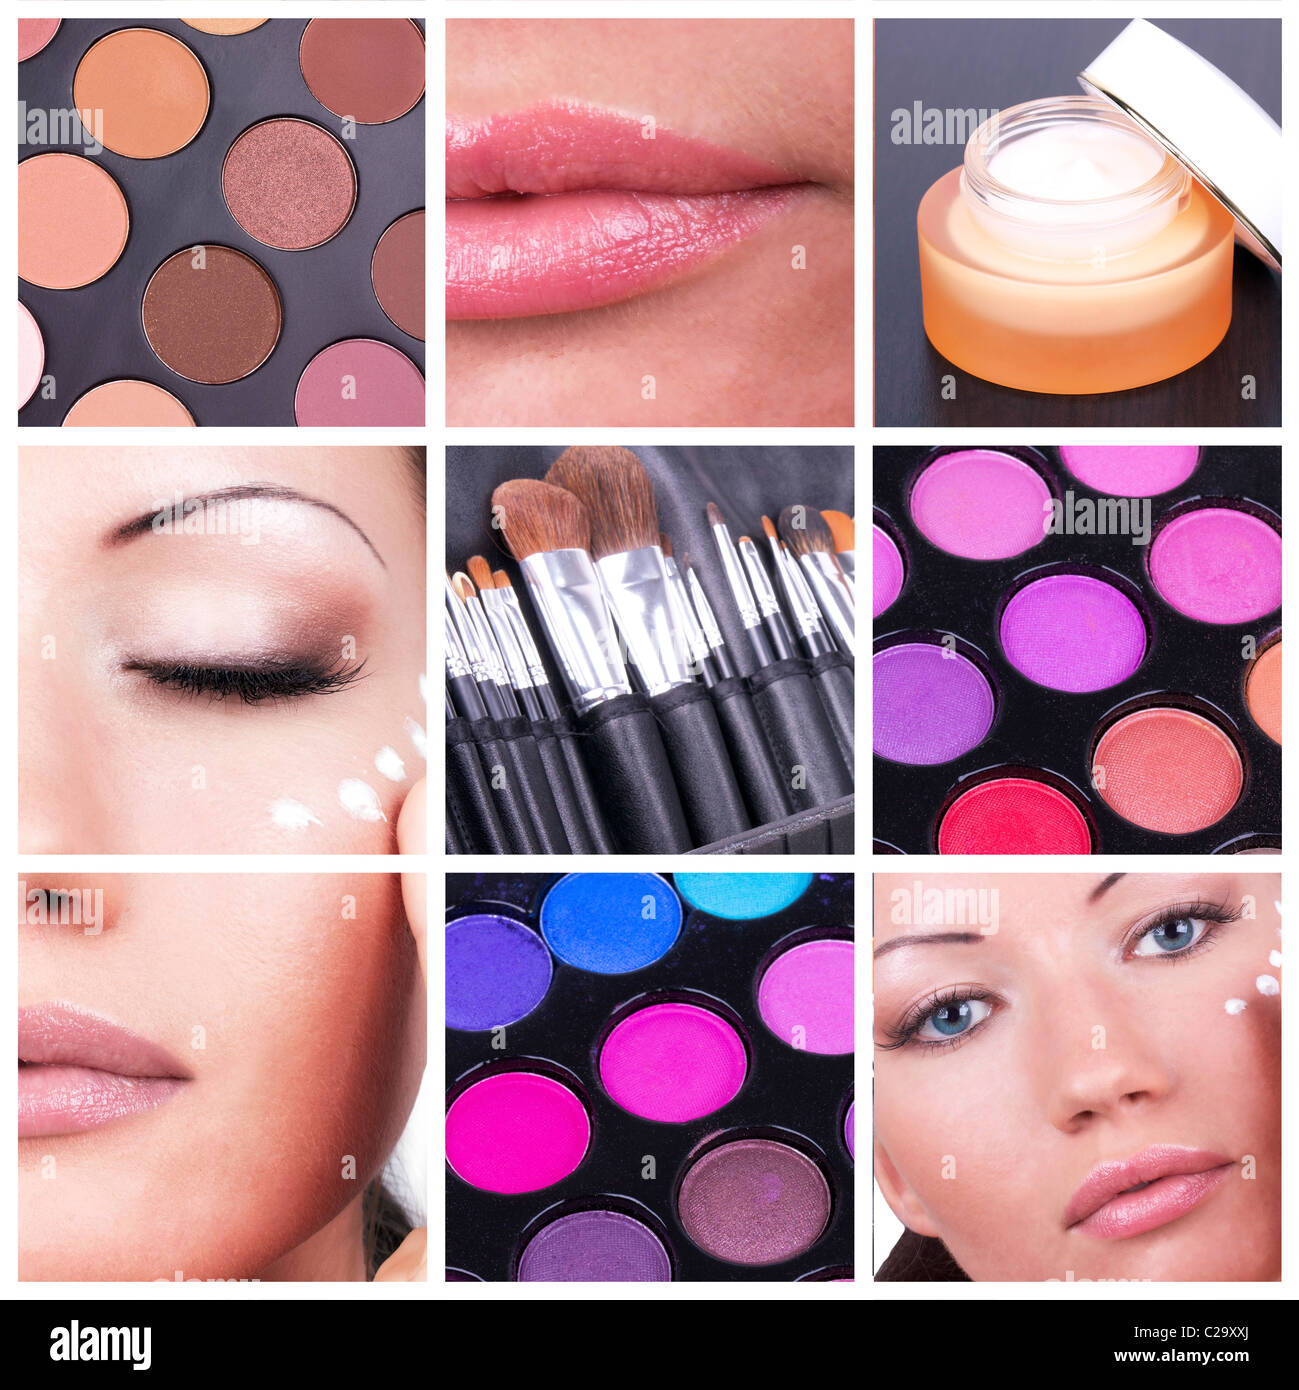 Collage with woman and make-up tools Stock Photo